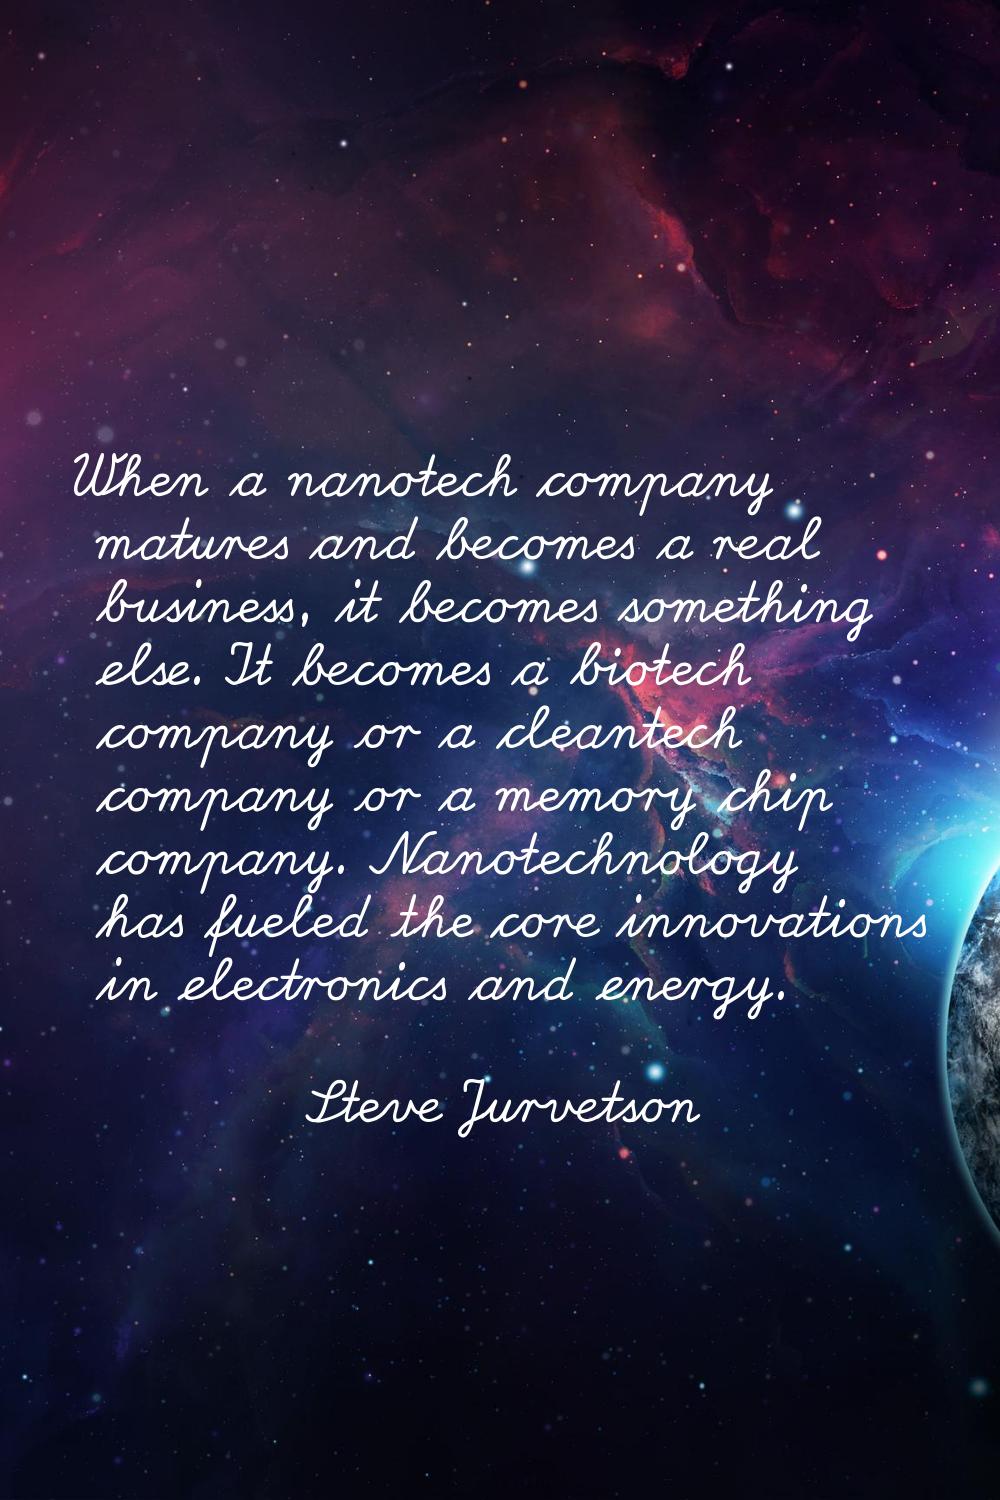 When a nanotech company matures and becomes a real business, it becomes something else. It becomes 